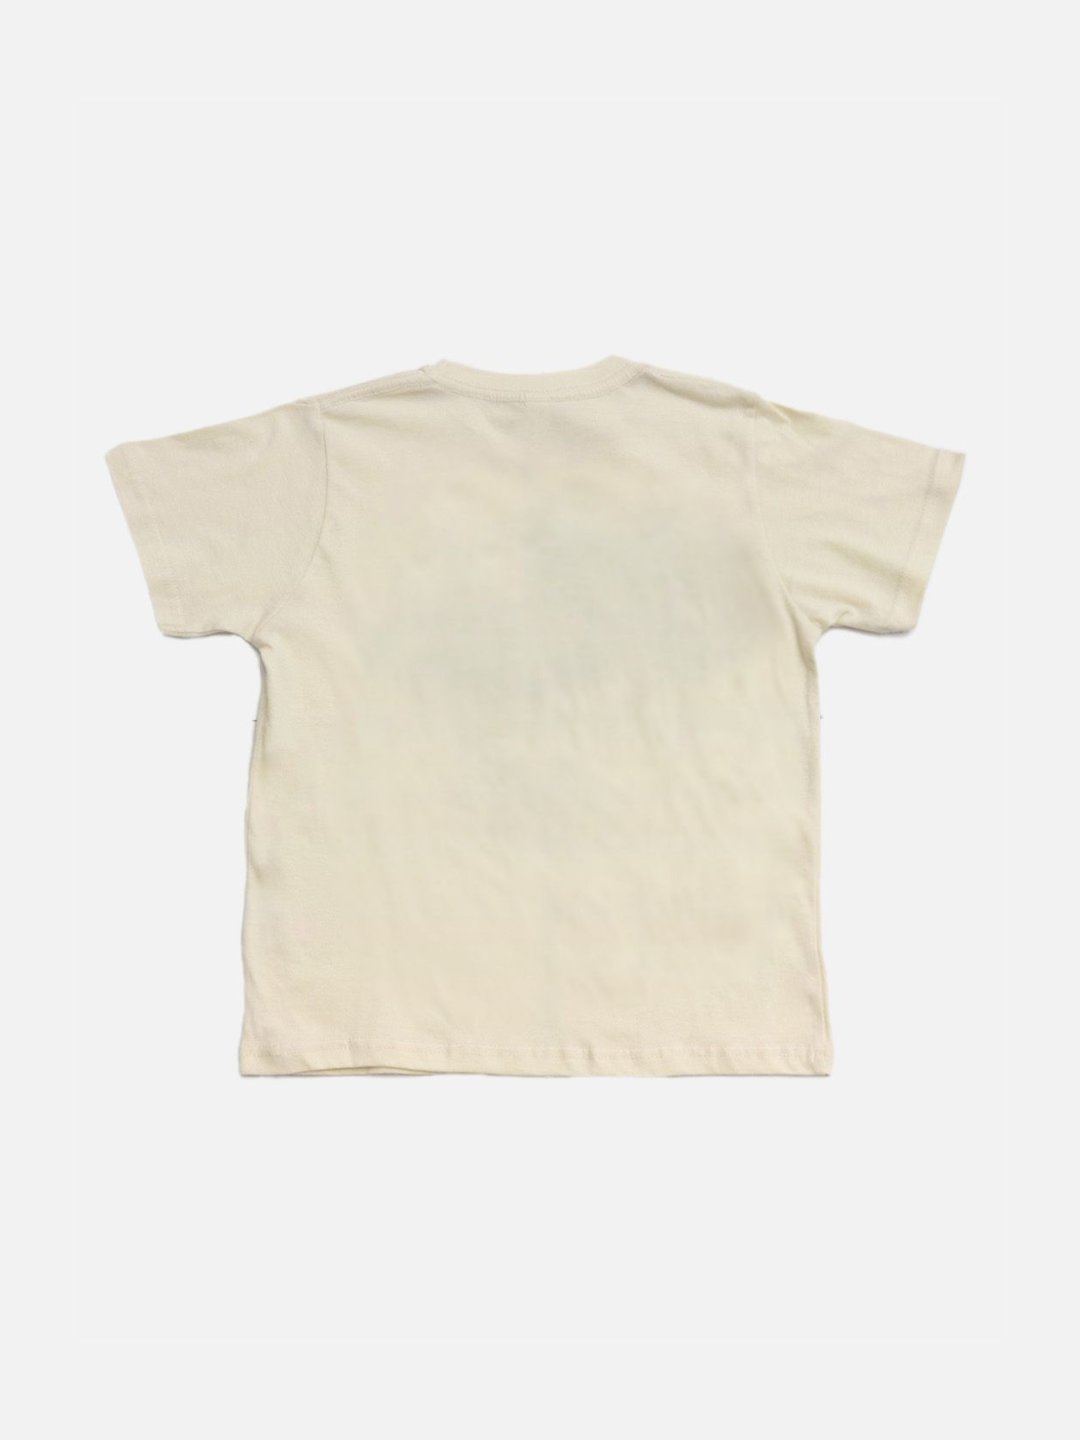 A kids' tee shirt in cream, back view